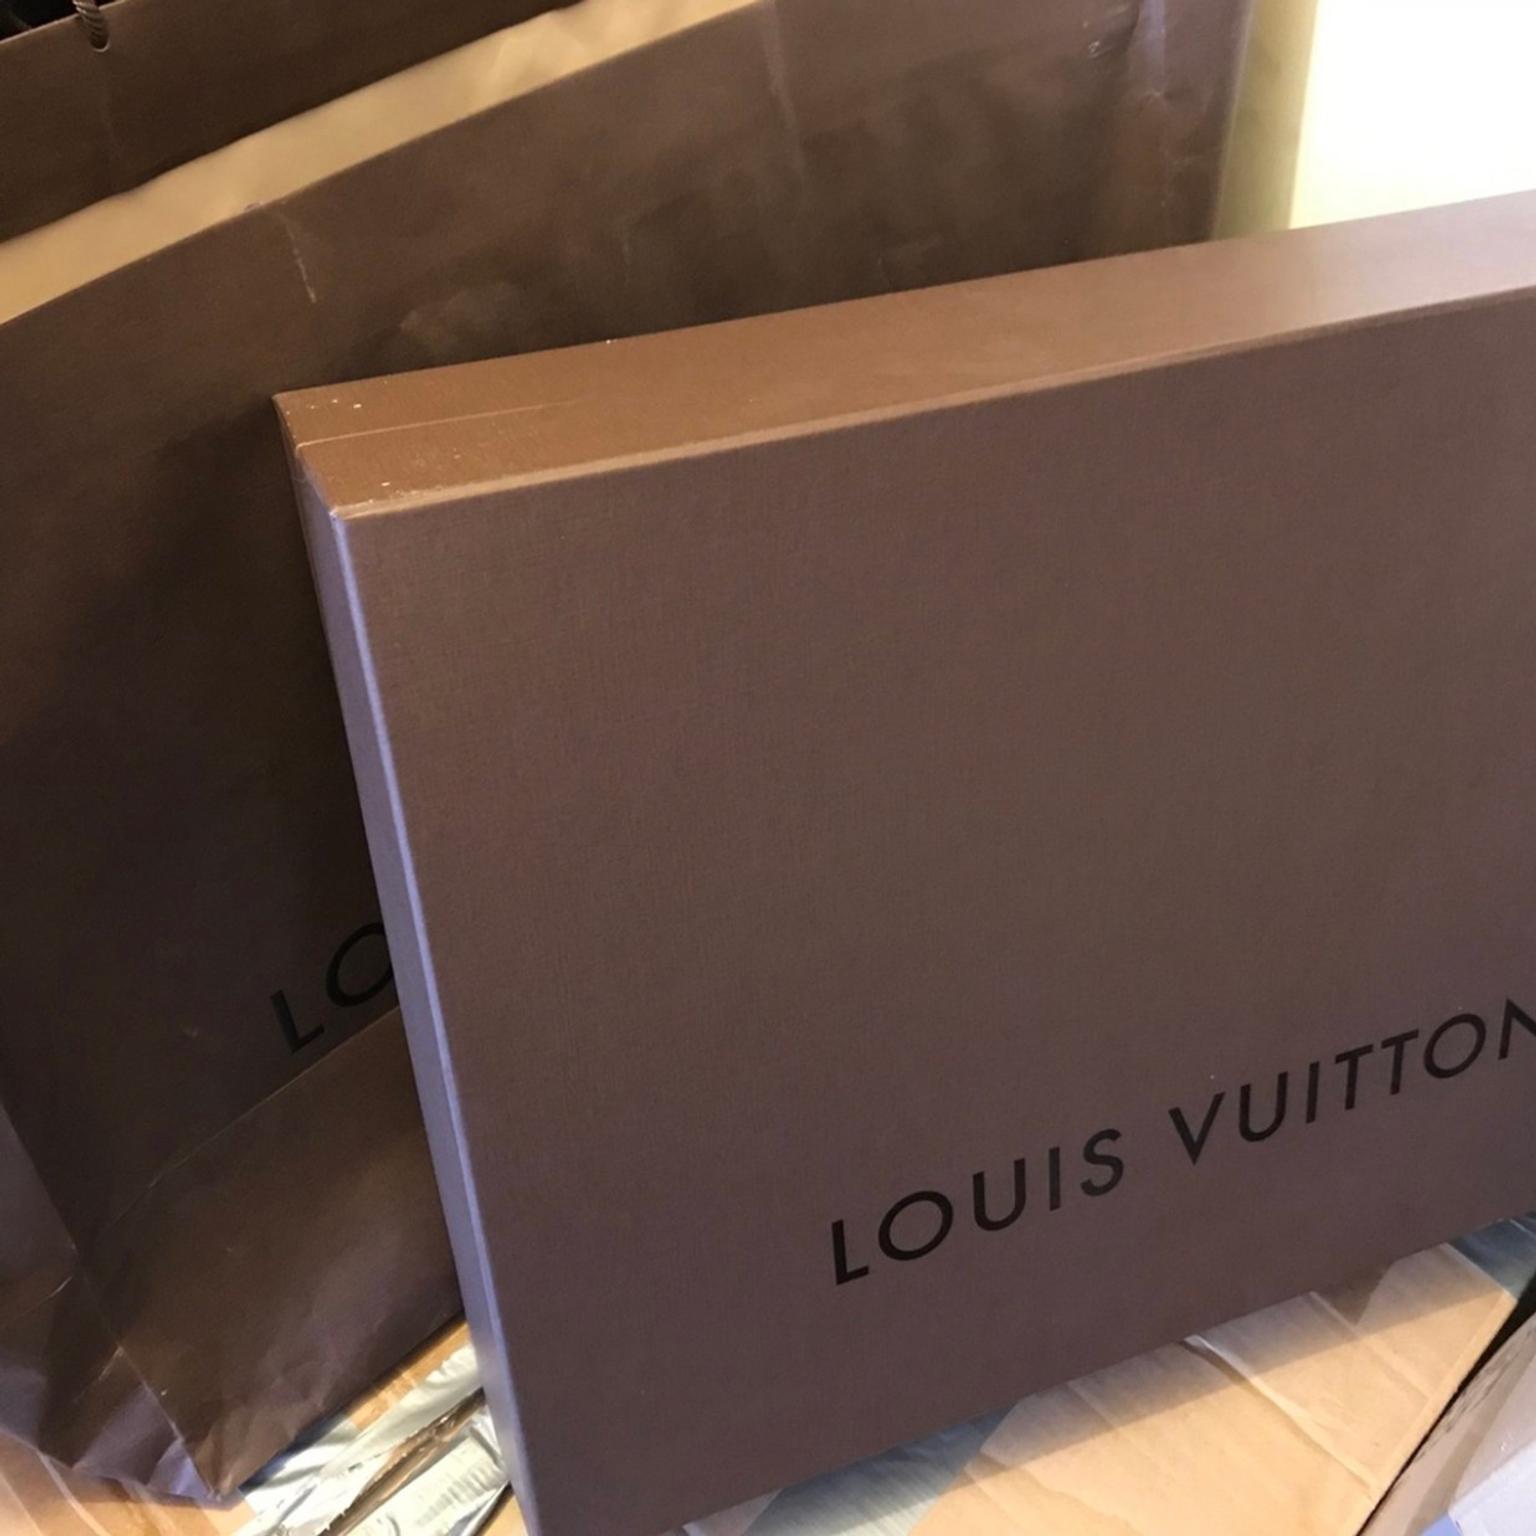 Louis Vuitton keepall 45 with box and receipt in CO2 Colchester for £650.00 for sale | Shpock